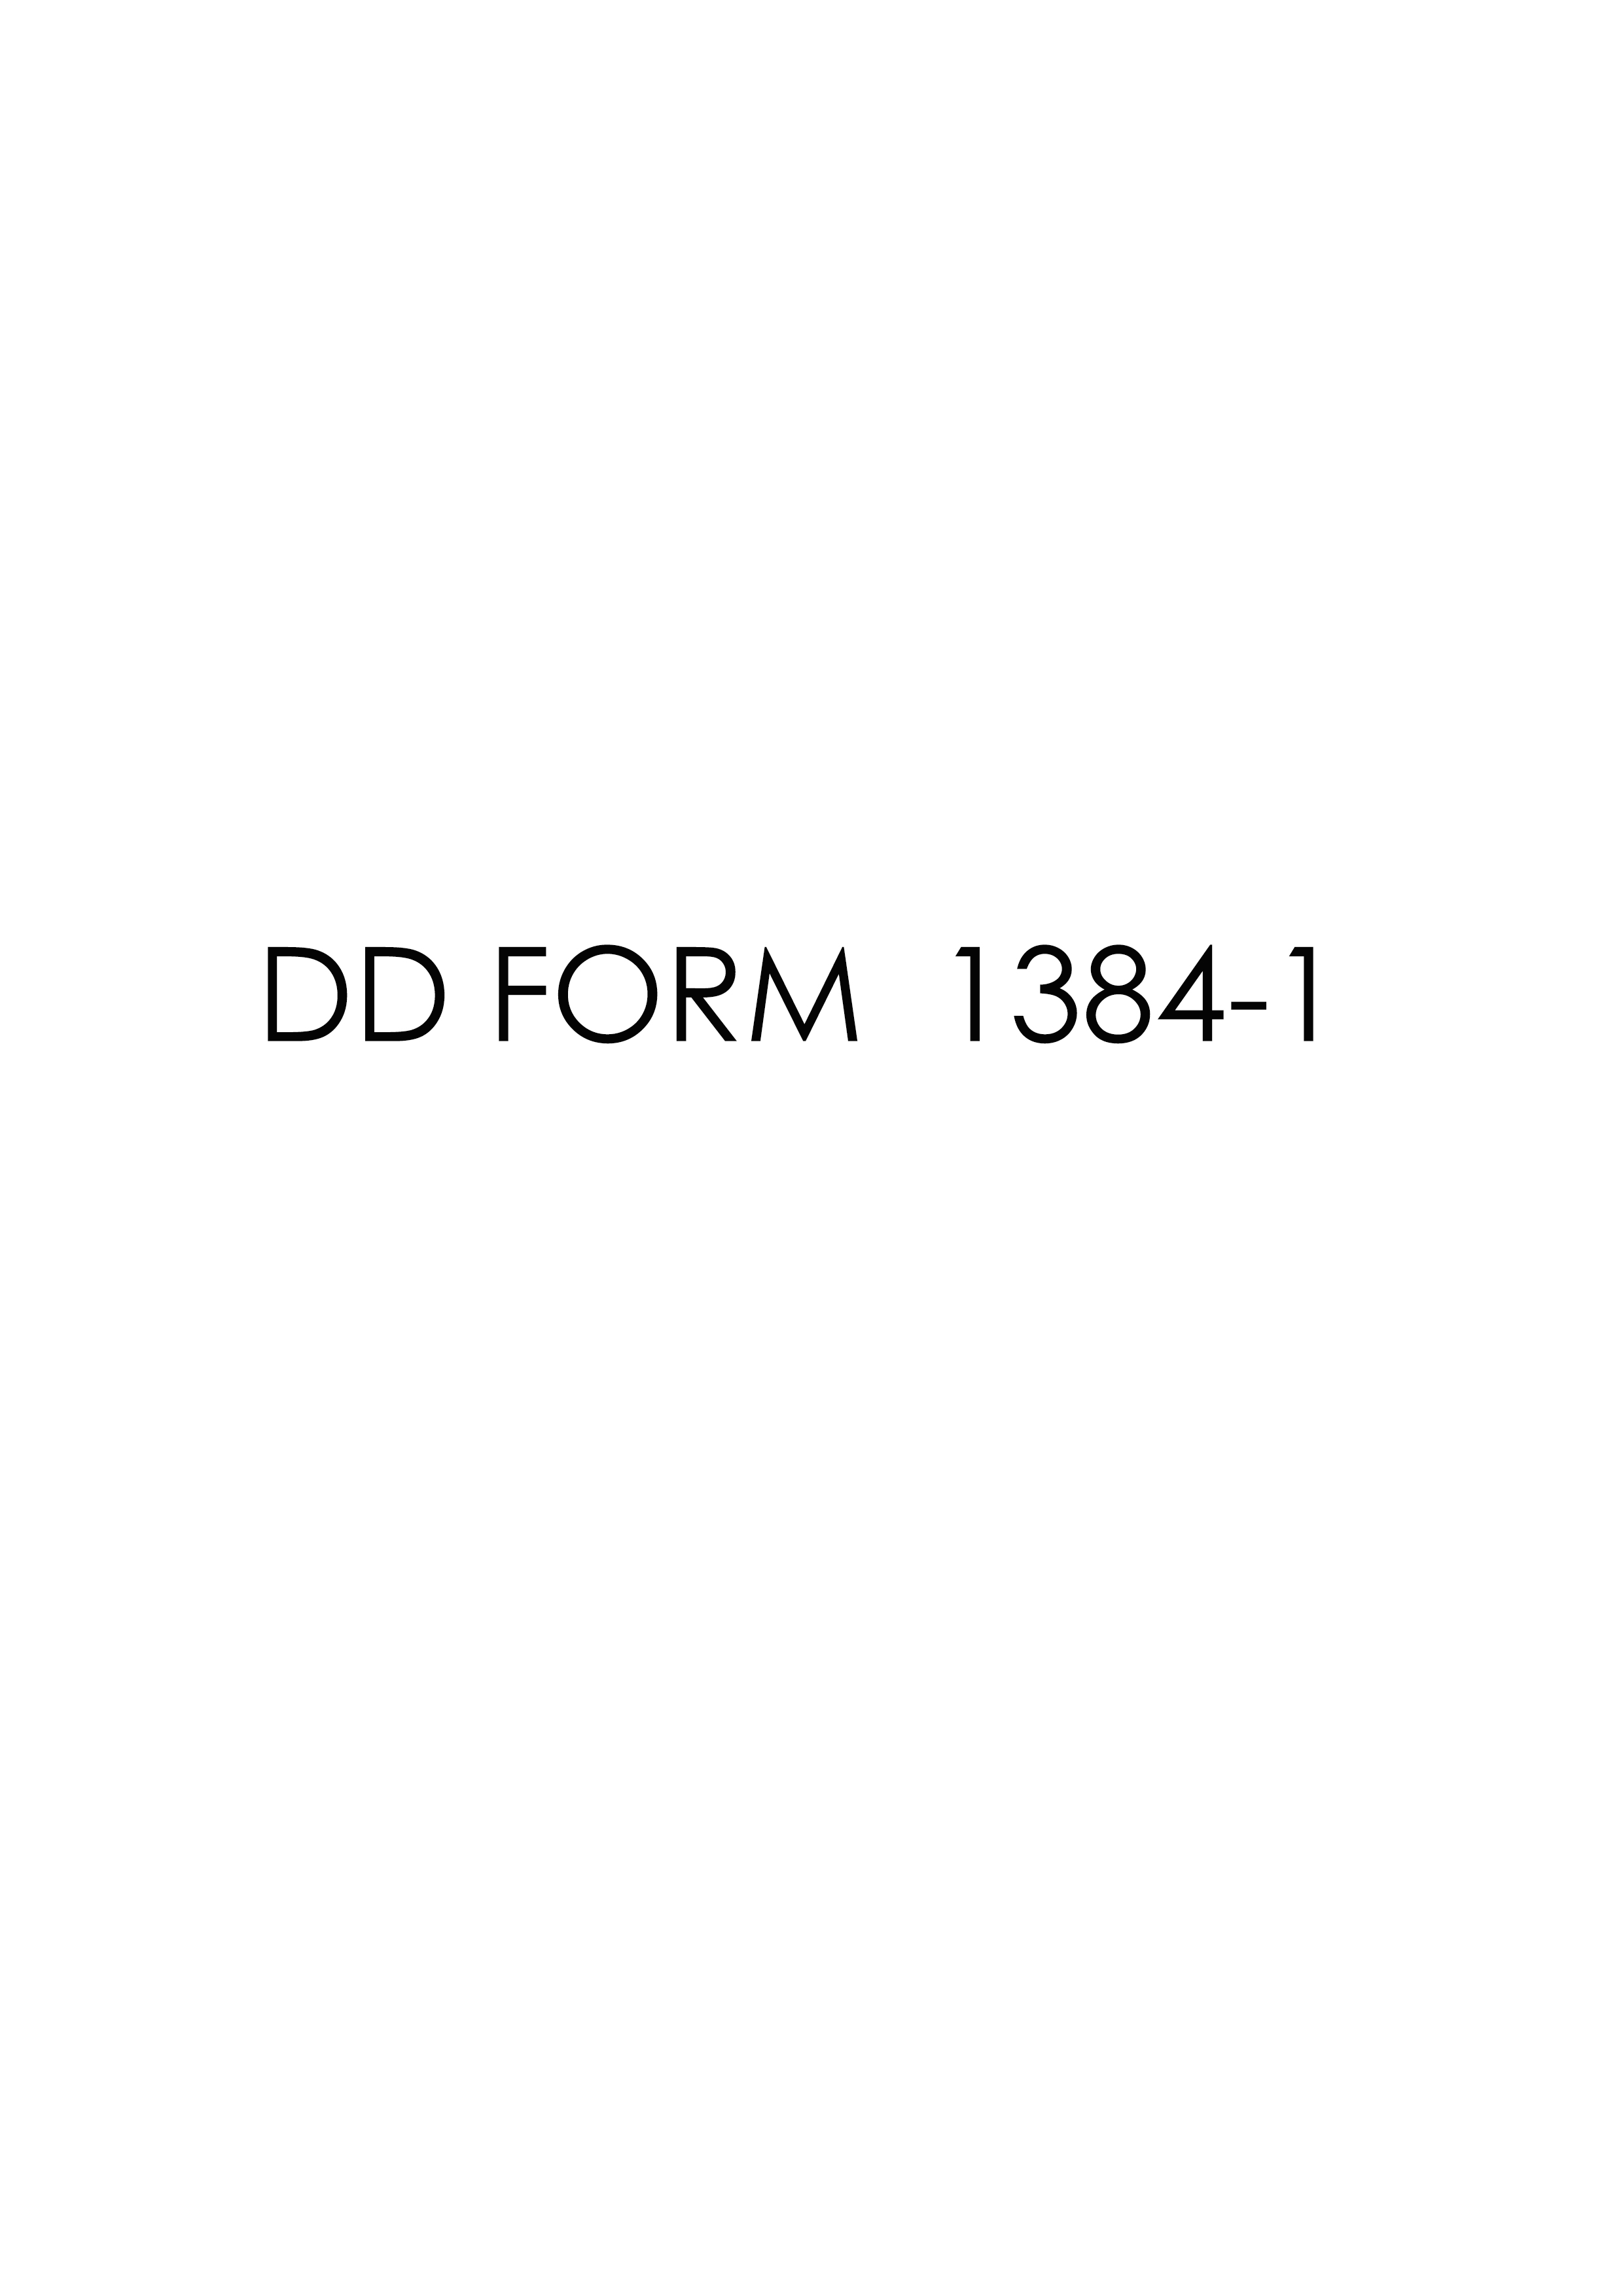 Download Fillable dd Form 1384-1